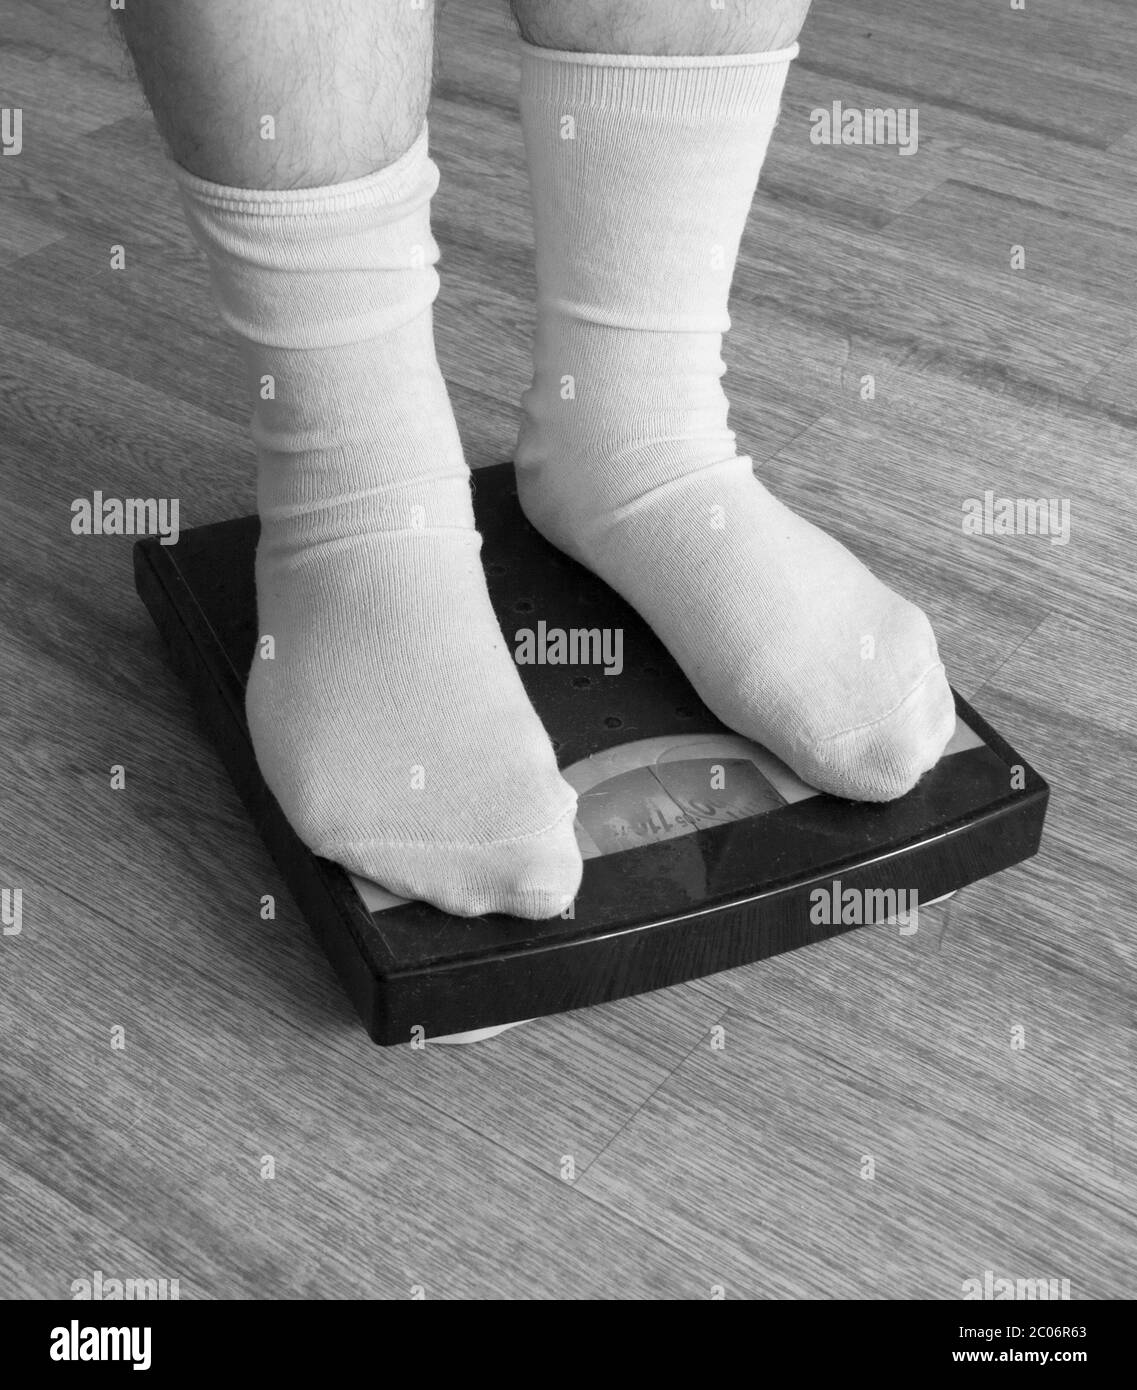 https://c8.alamy.com/comp/2C06R63/legs-in-white-socks-stand-on-mechanical-scales-of-blue-color-front-view-2C06R63.jpg